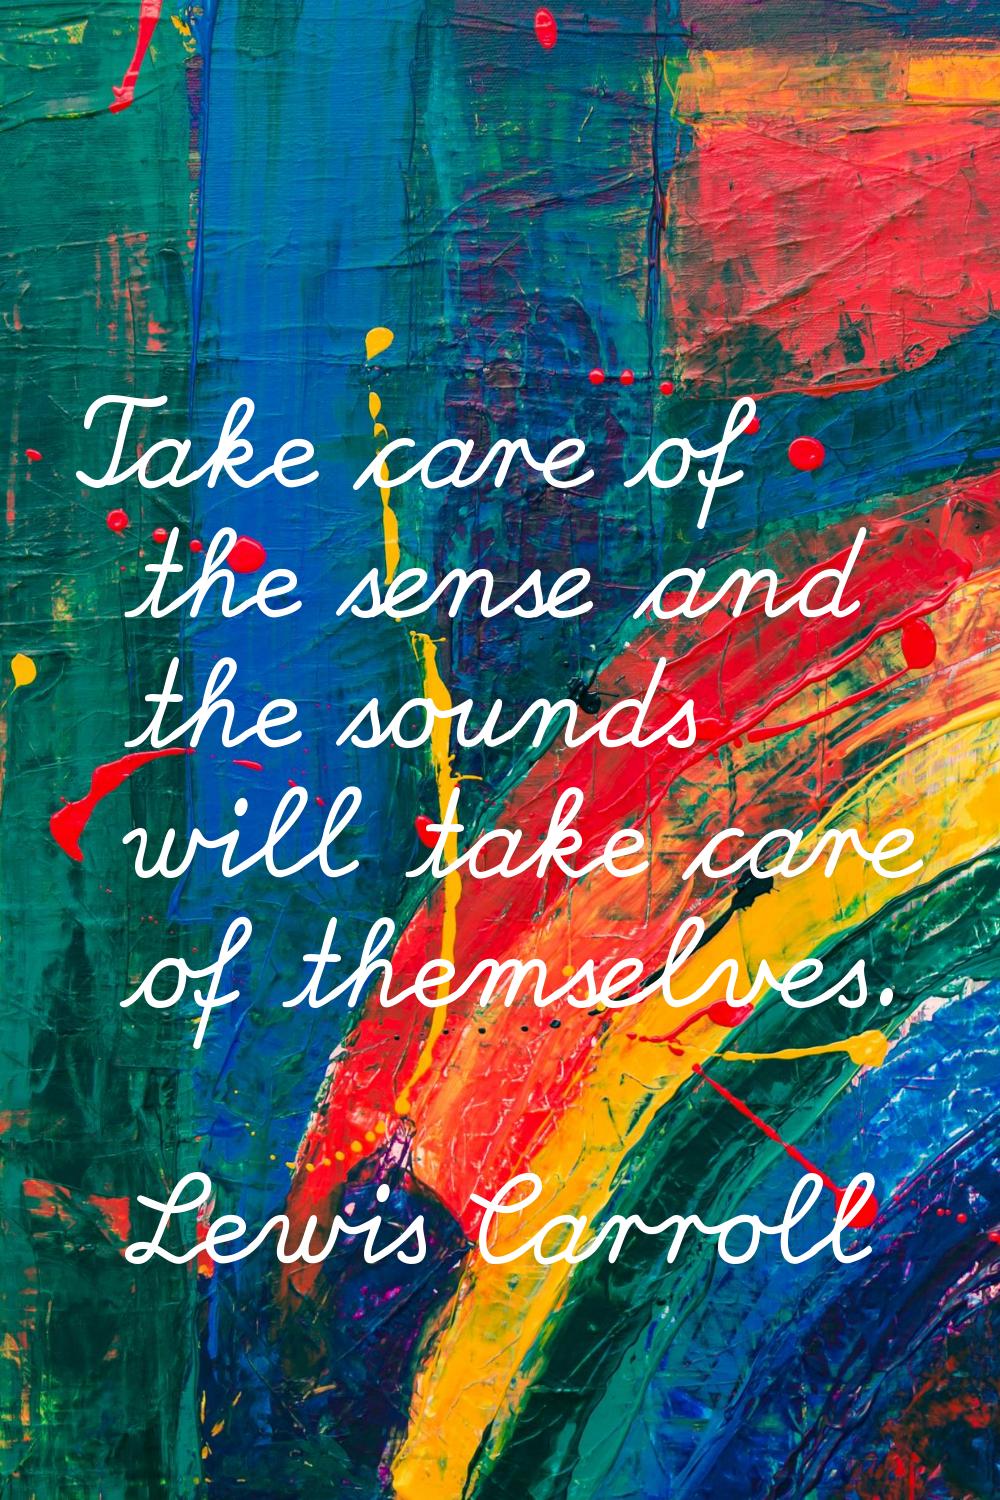 Take care of the sense and the sounds will take care of themselves.